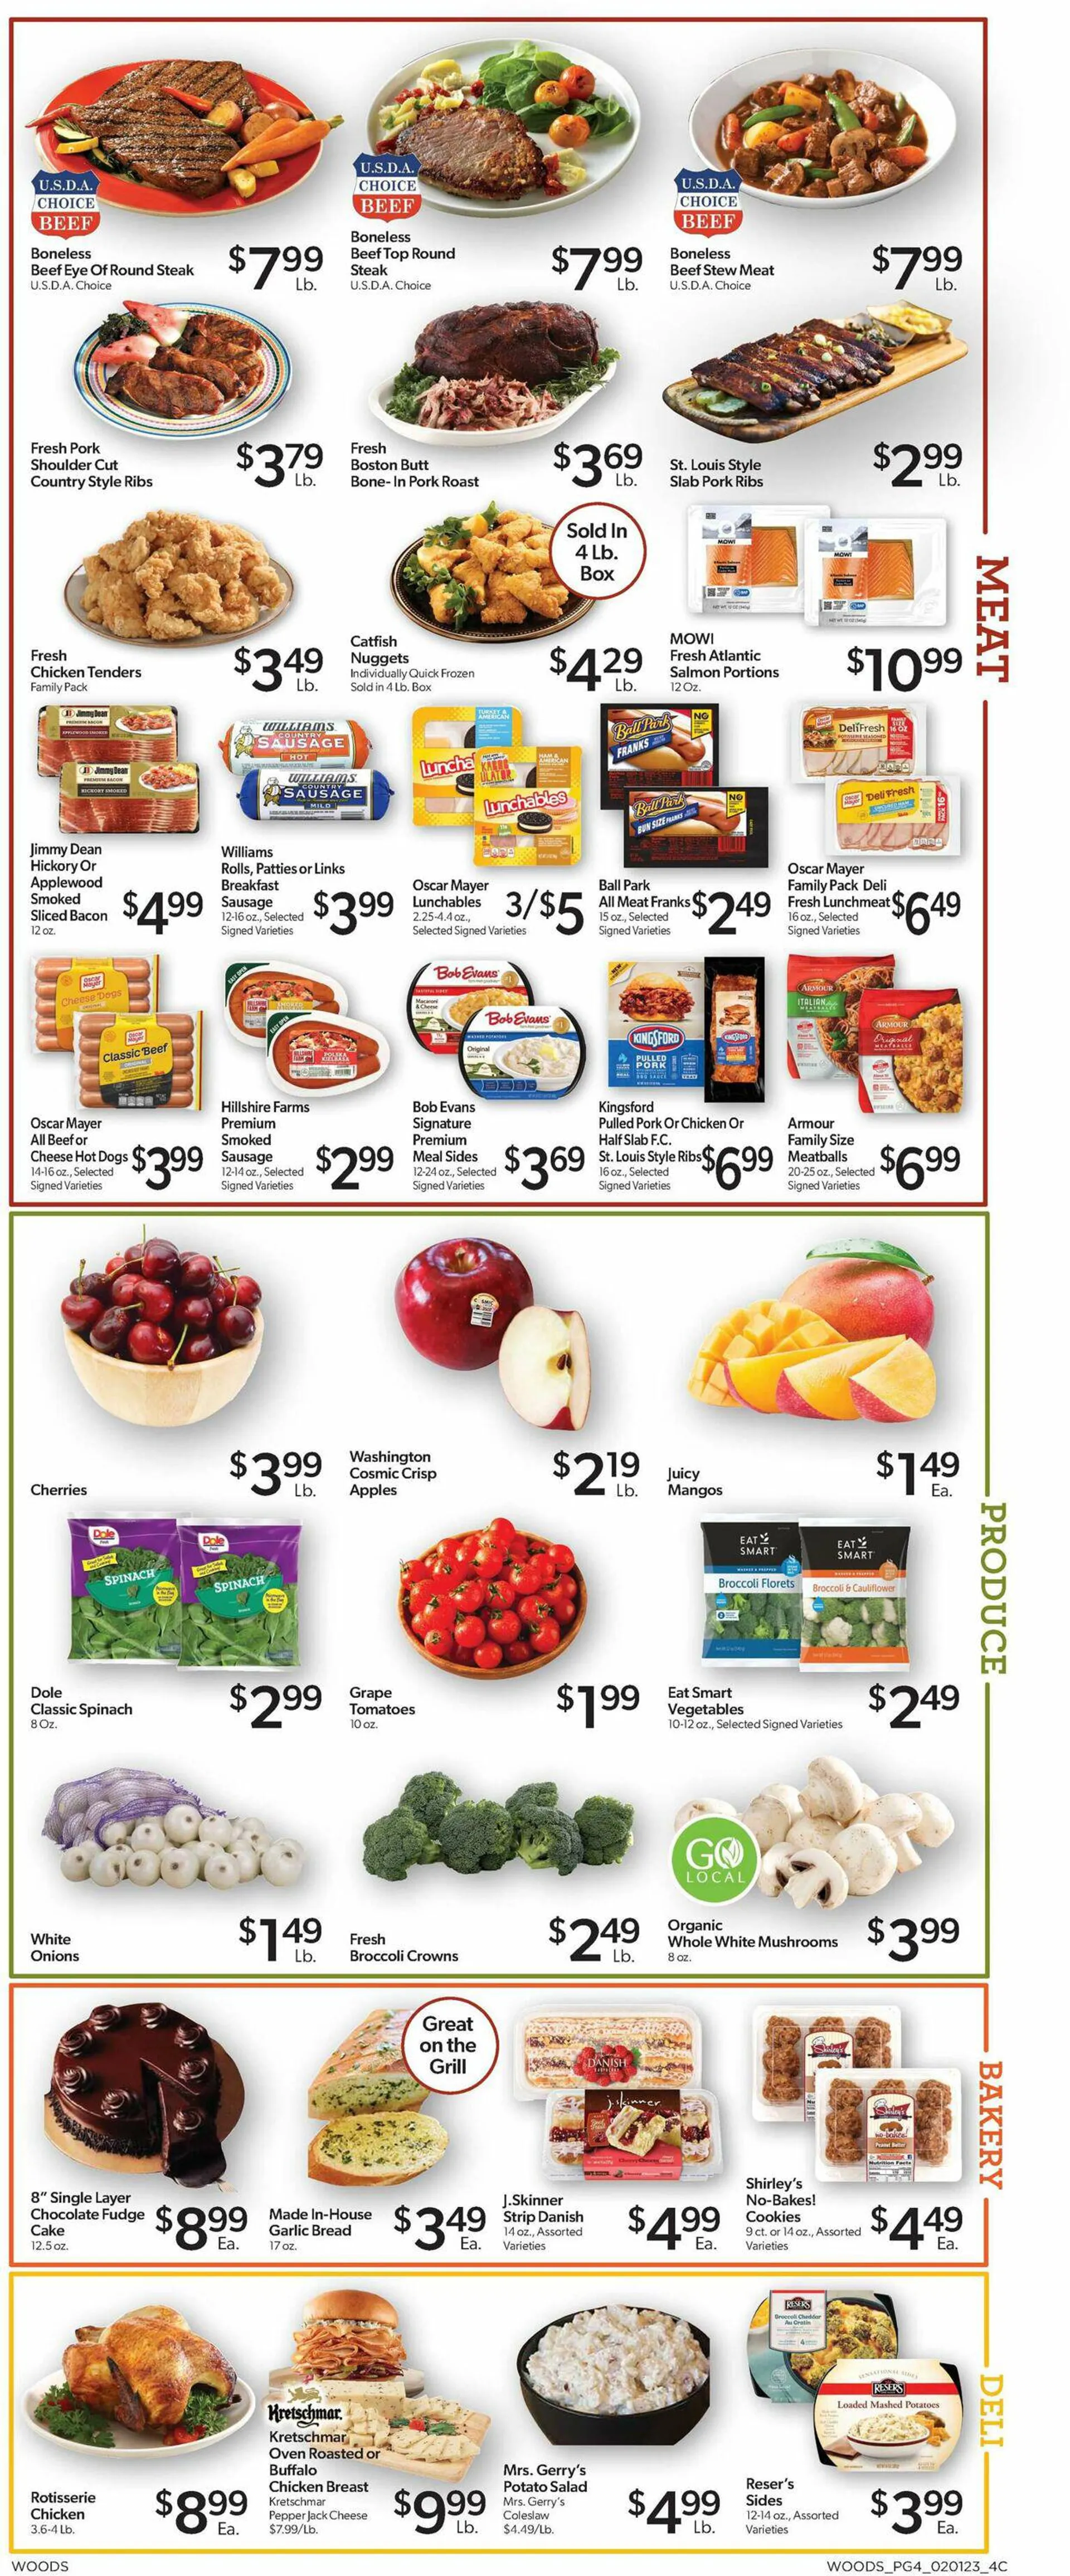 Woods Supermarket Current weekly ad - 4